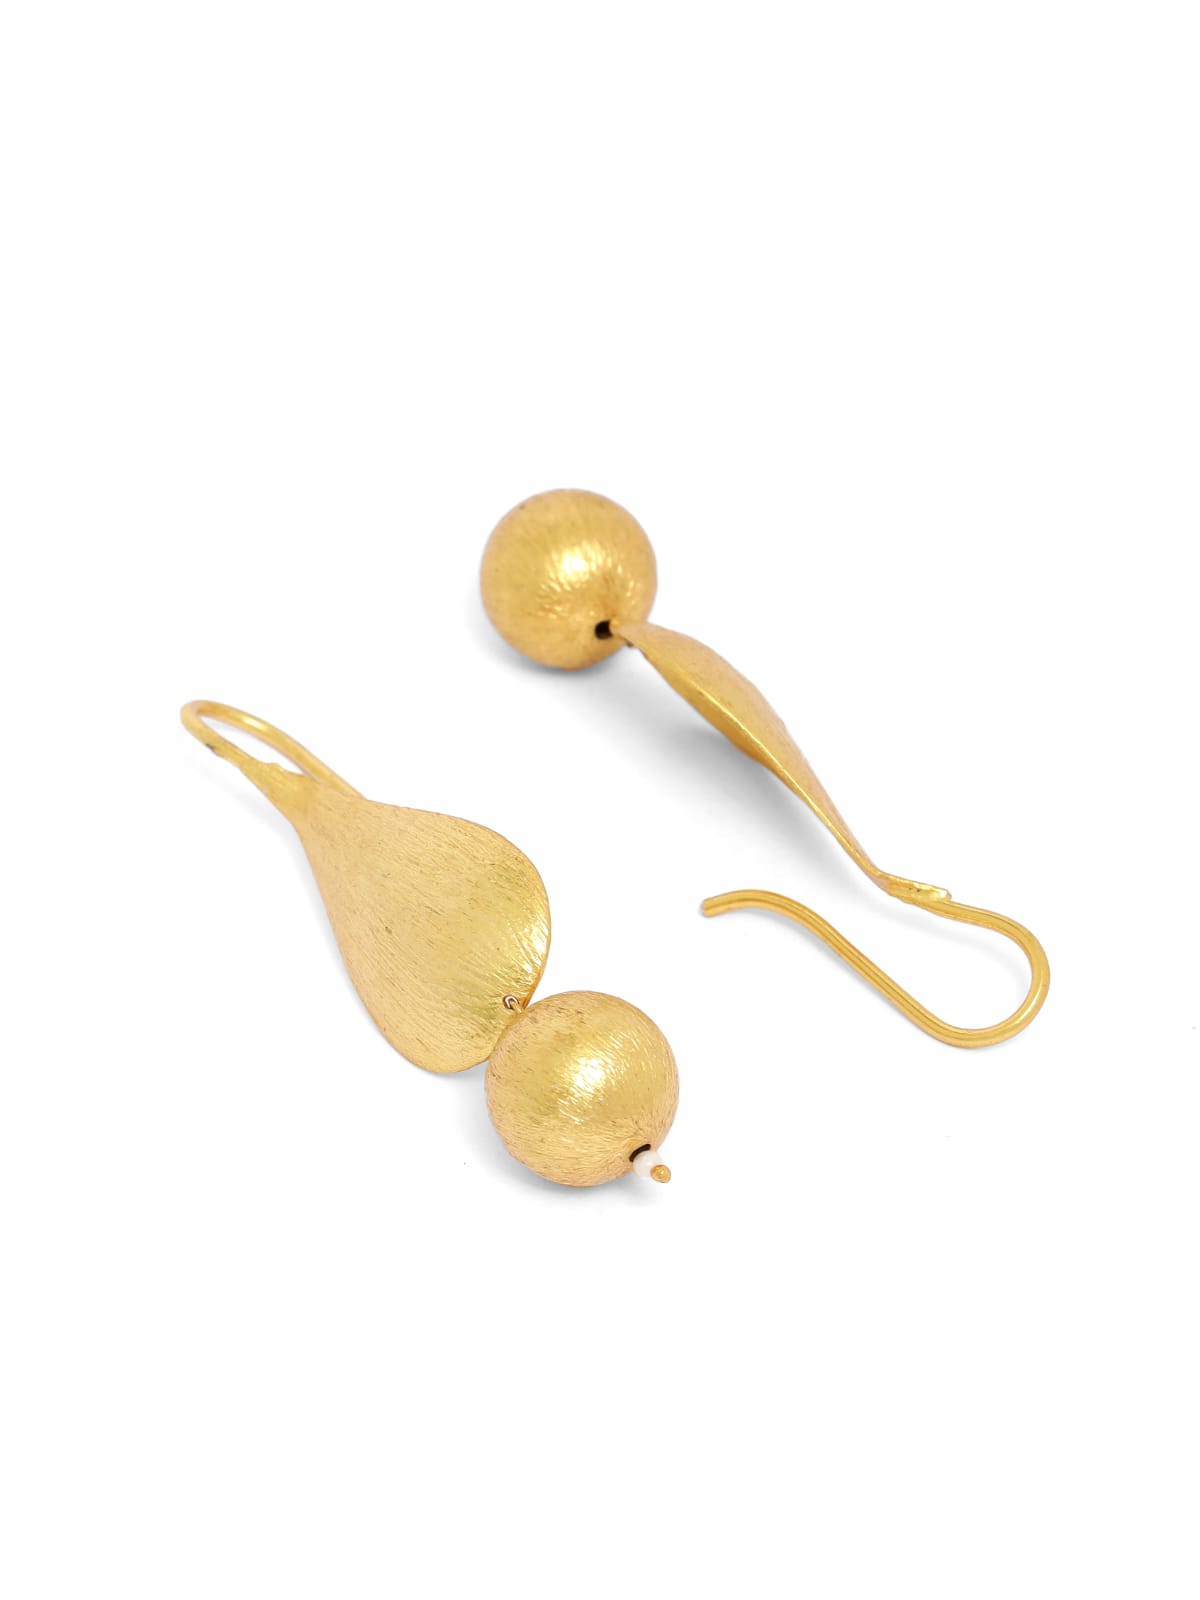 92.5 sterling Silver Gold plated texture ball leaf earrings.